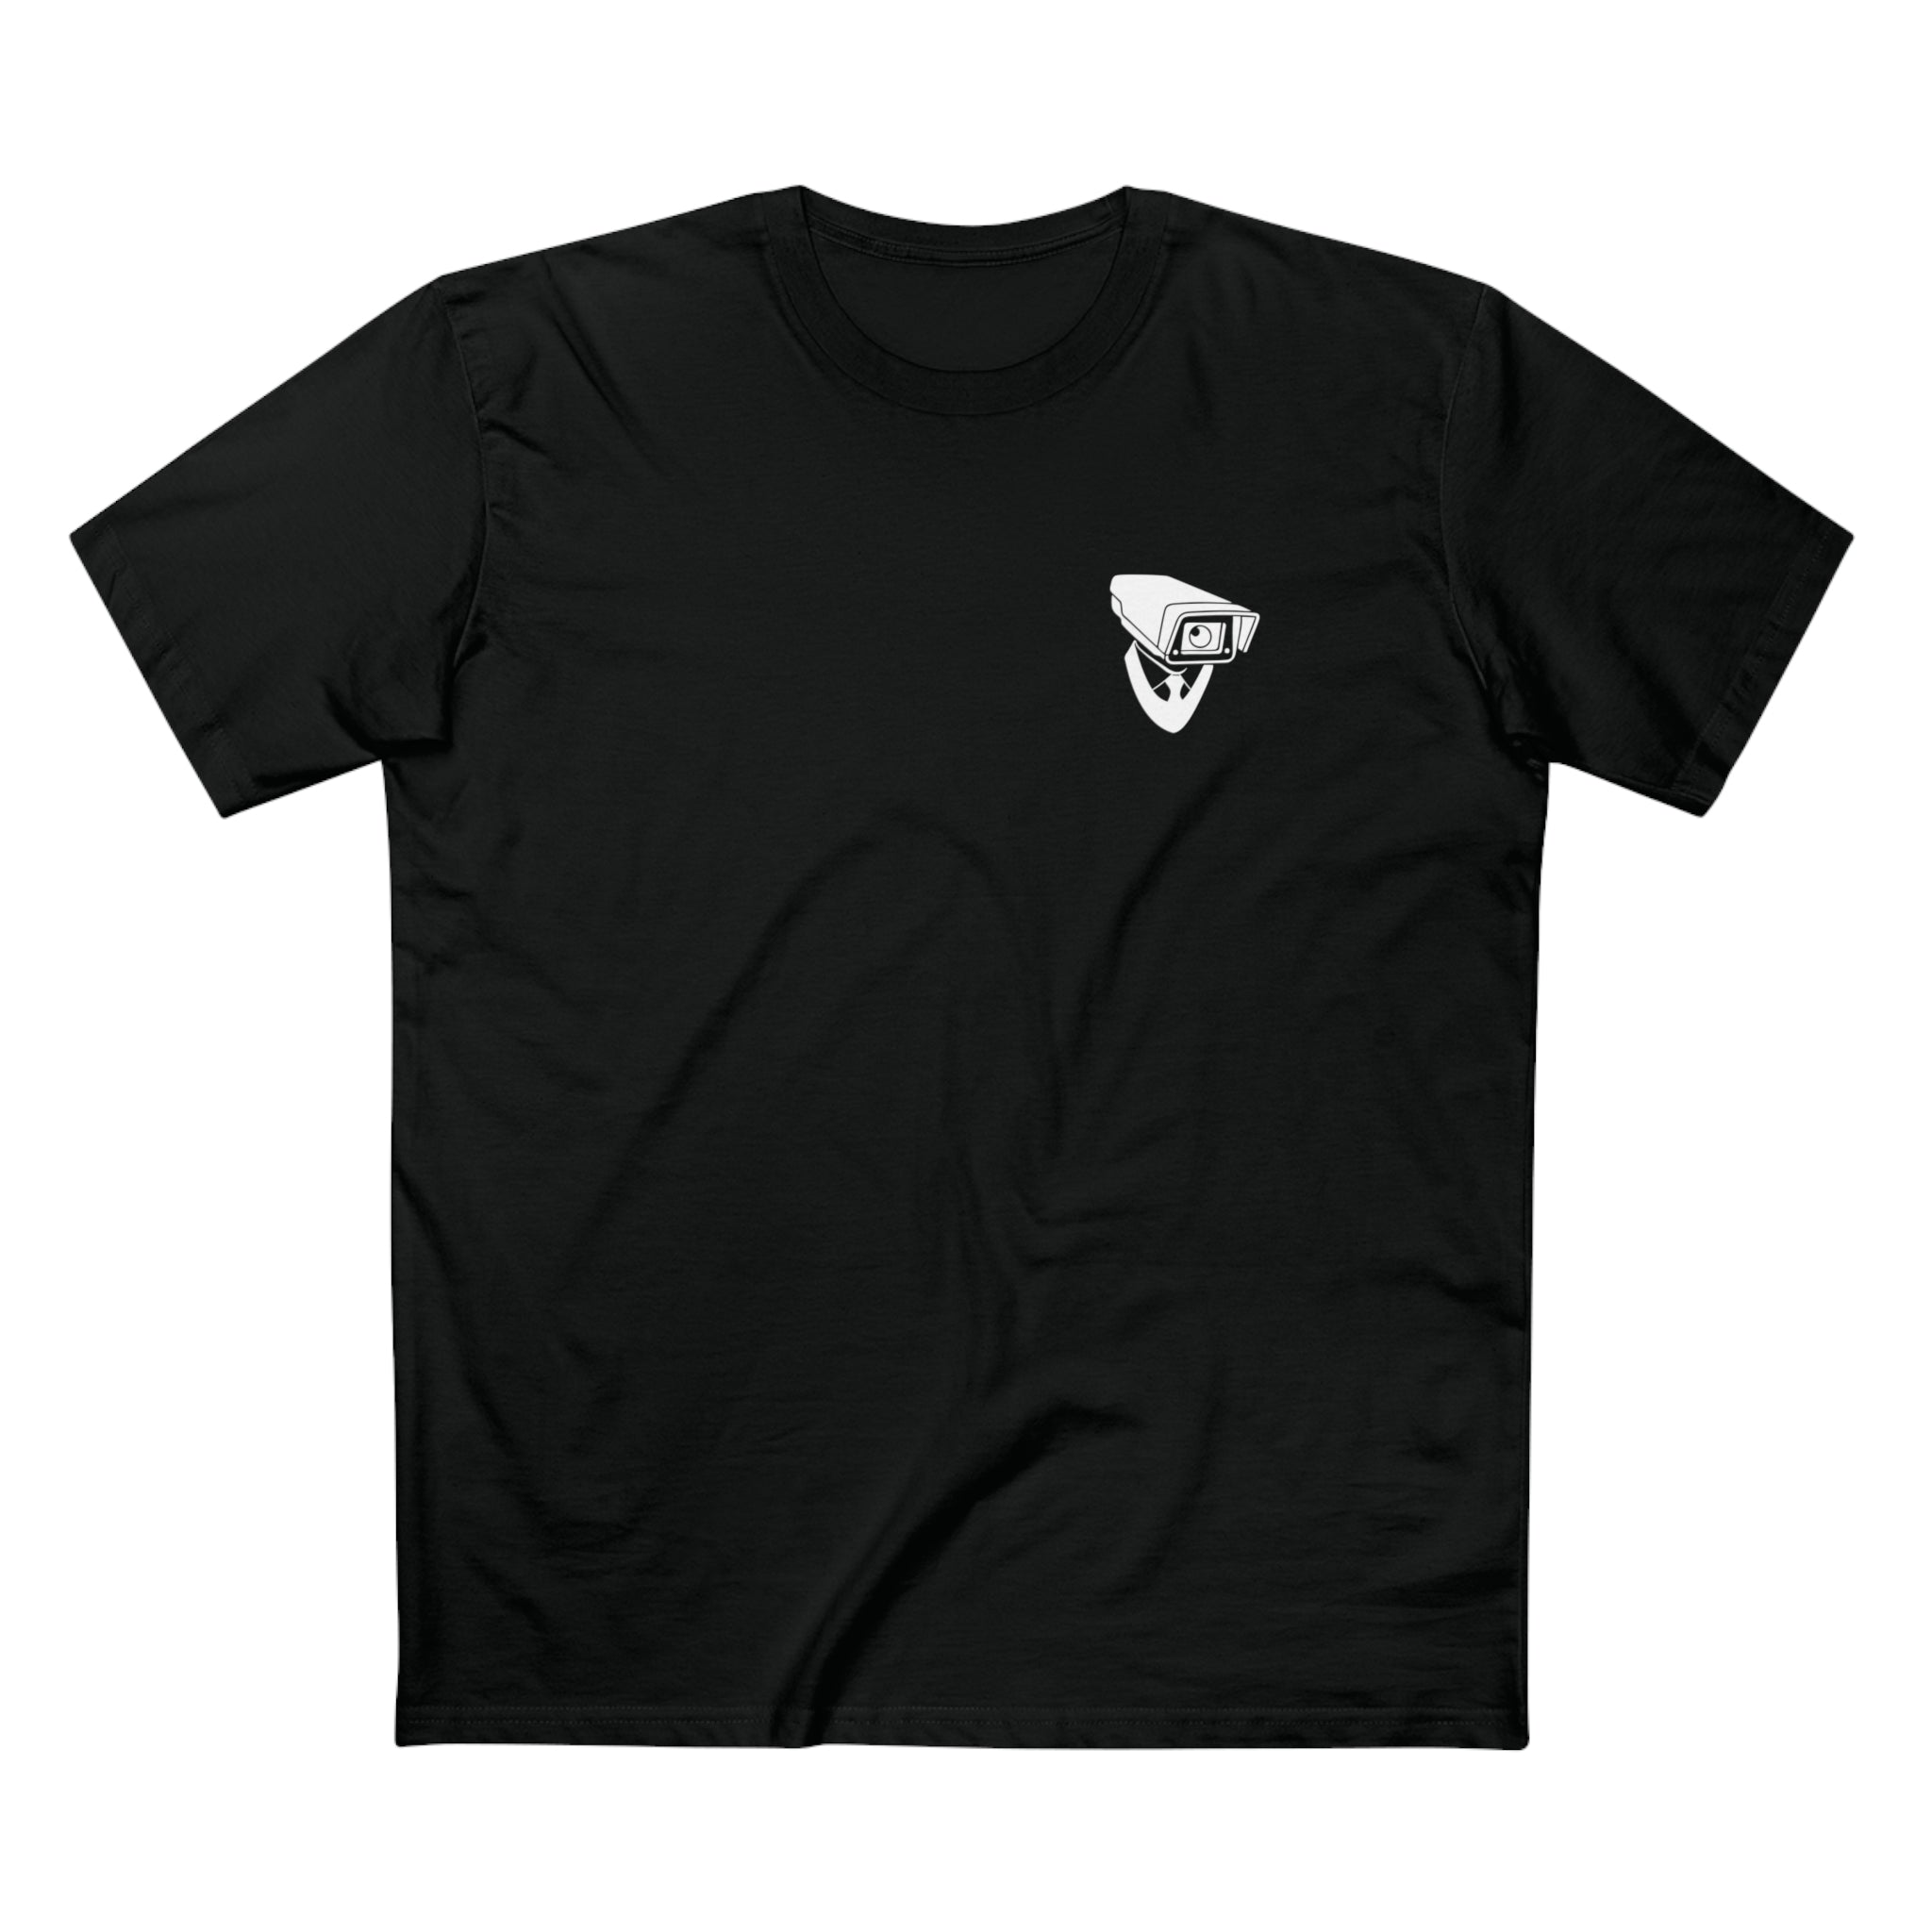 Surveillance Tee with iconic cameraman logo breast hit Black Tee on White Background